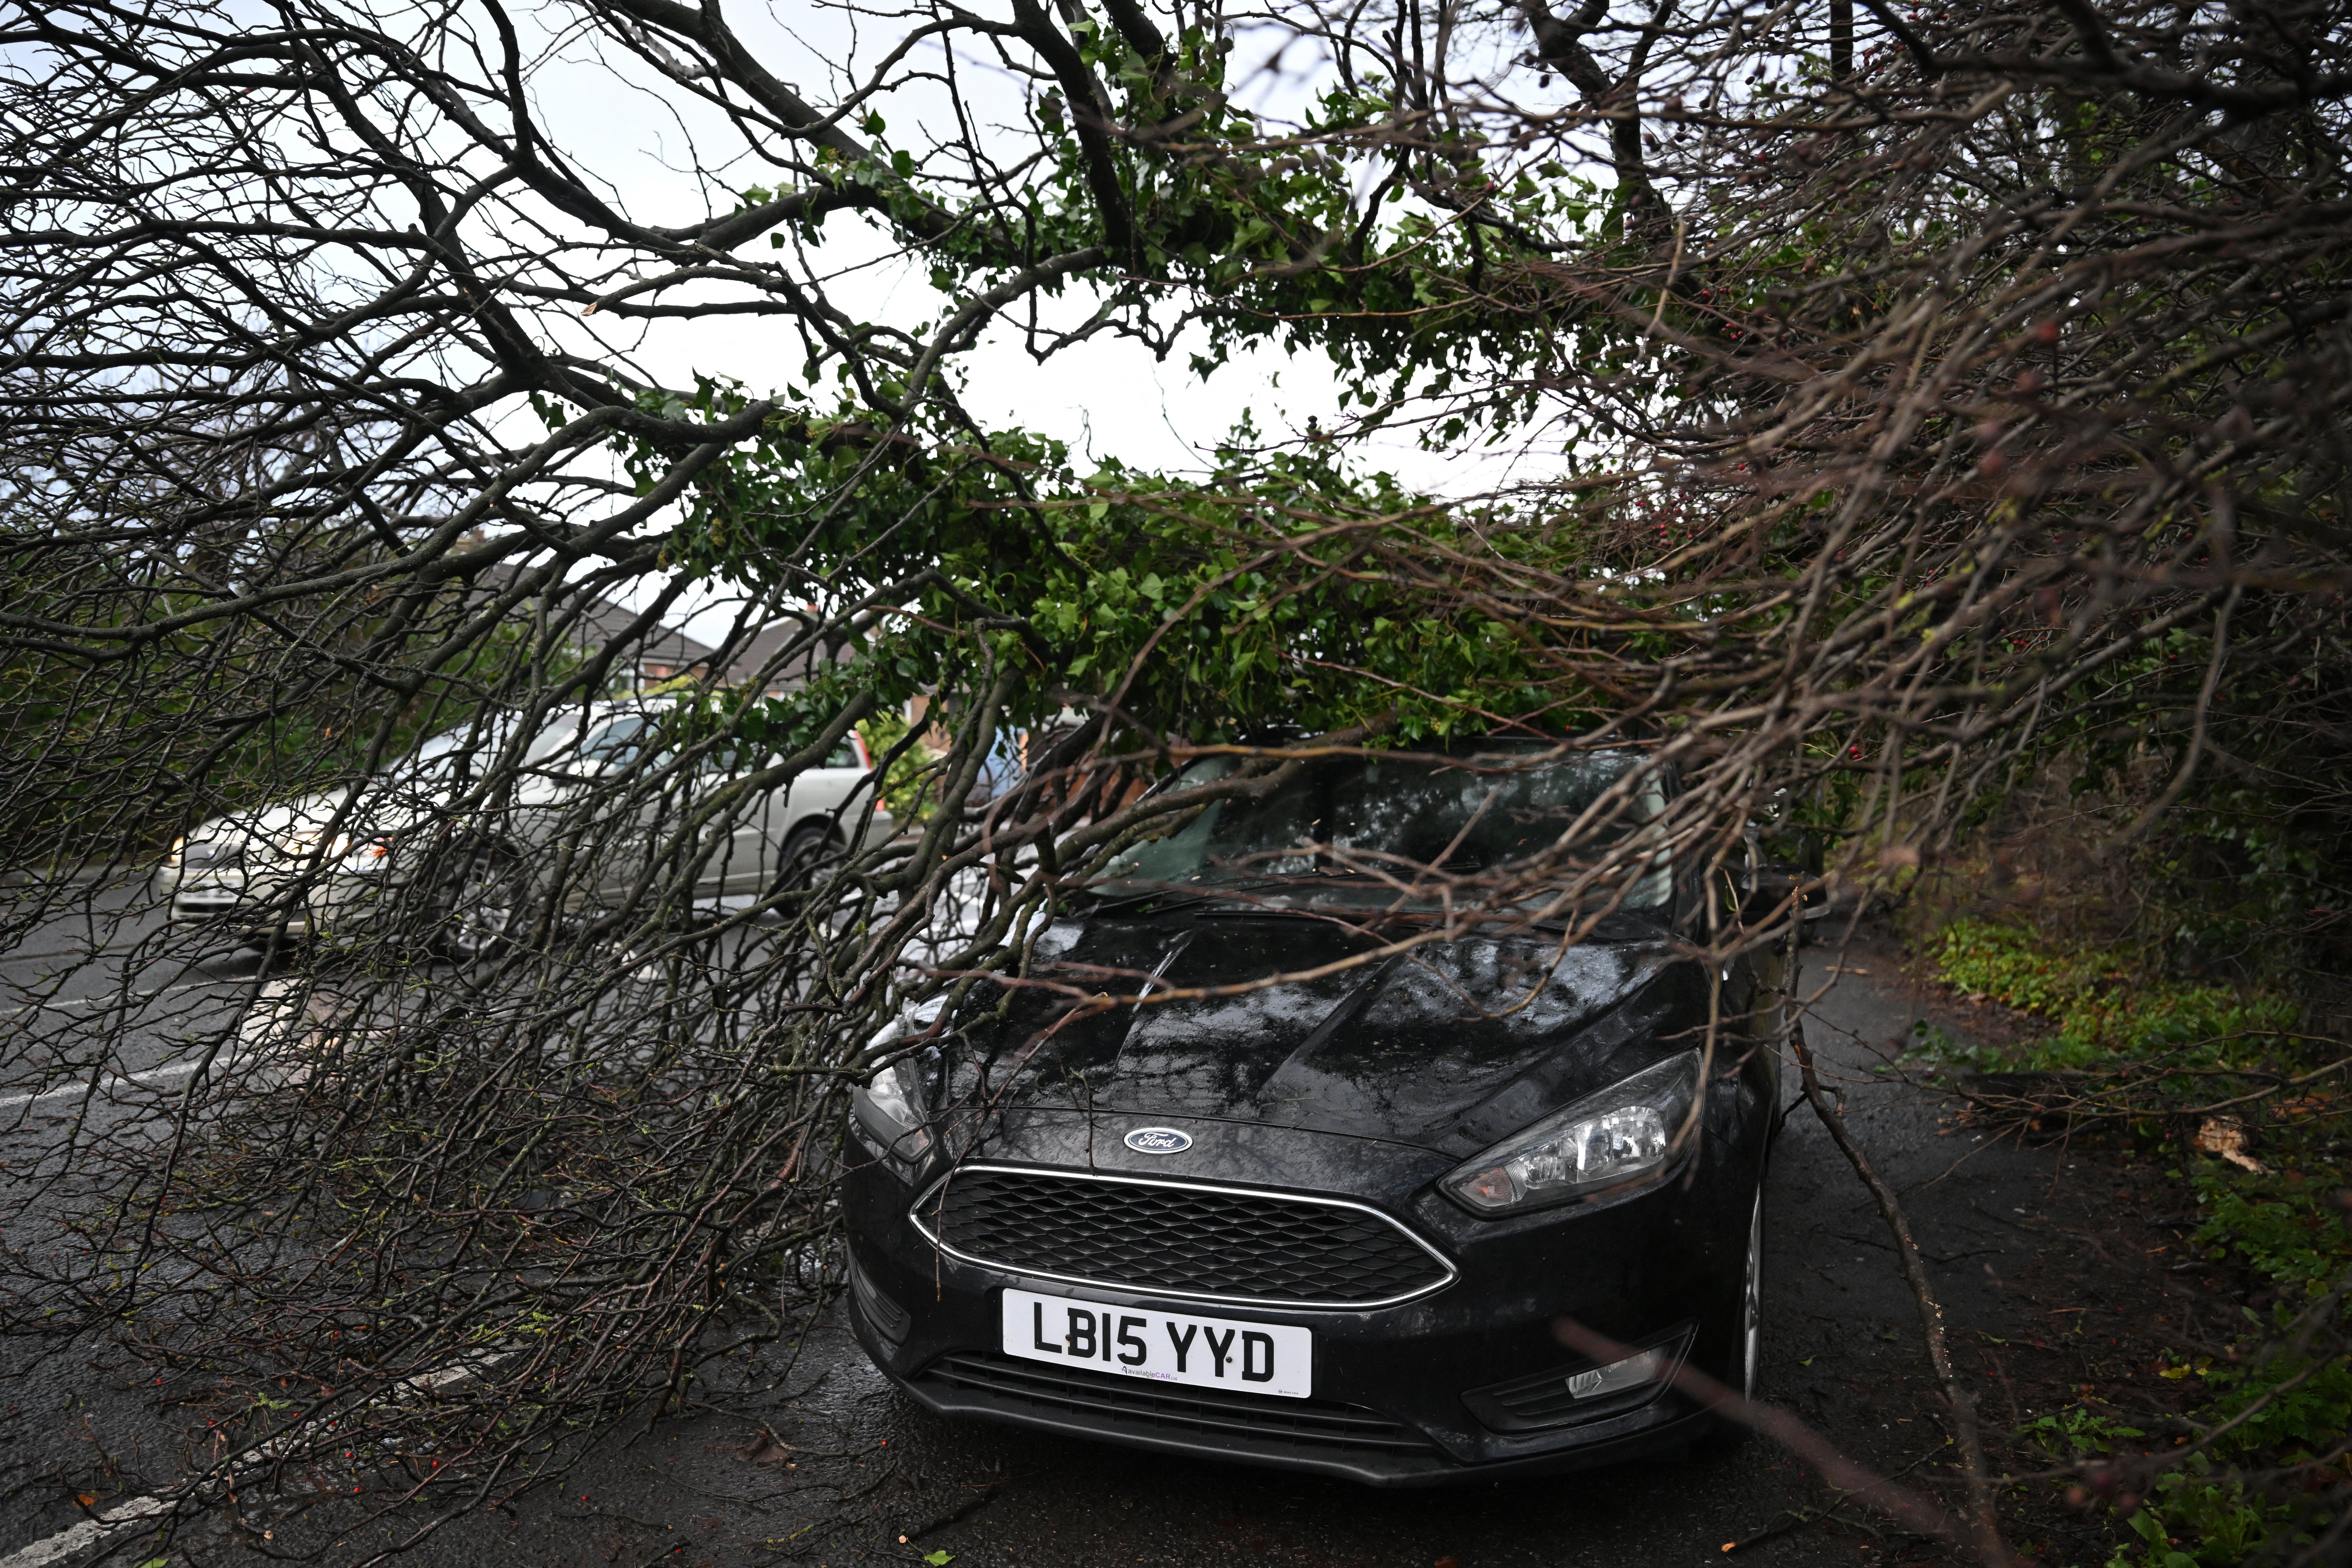 pBranches from a tree, brought down by strong winds, covers a parked car in a street in Huddersfield   /p